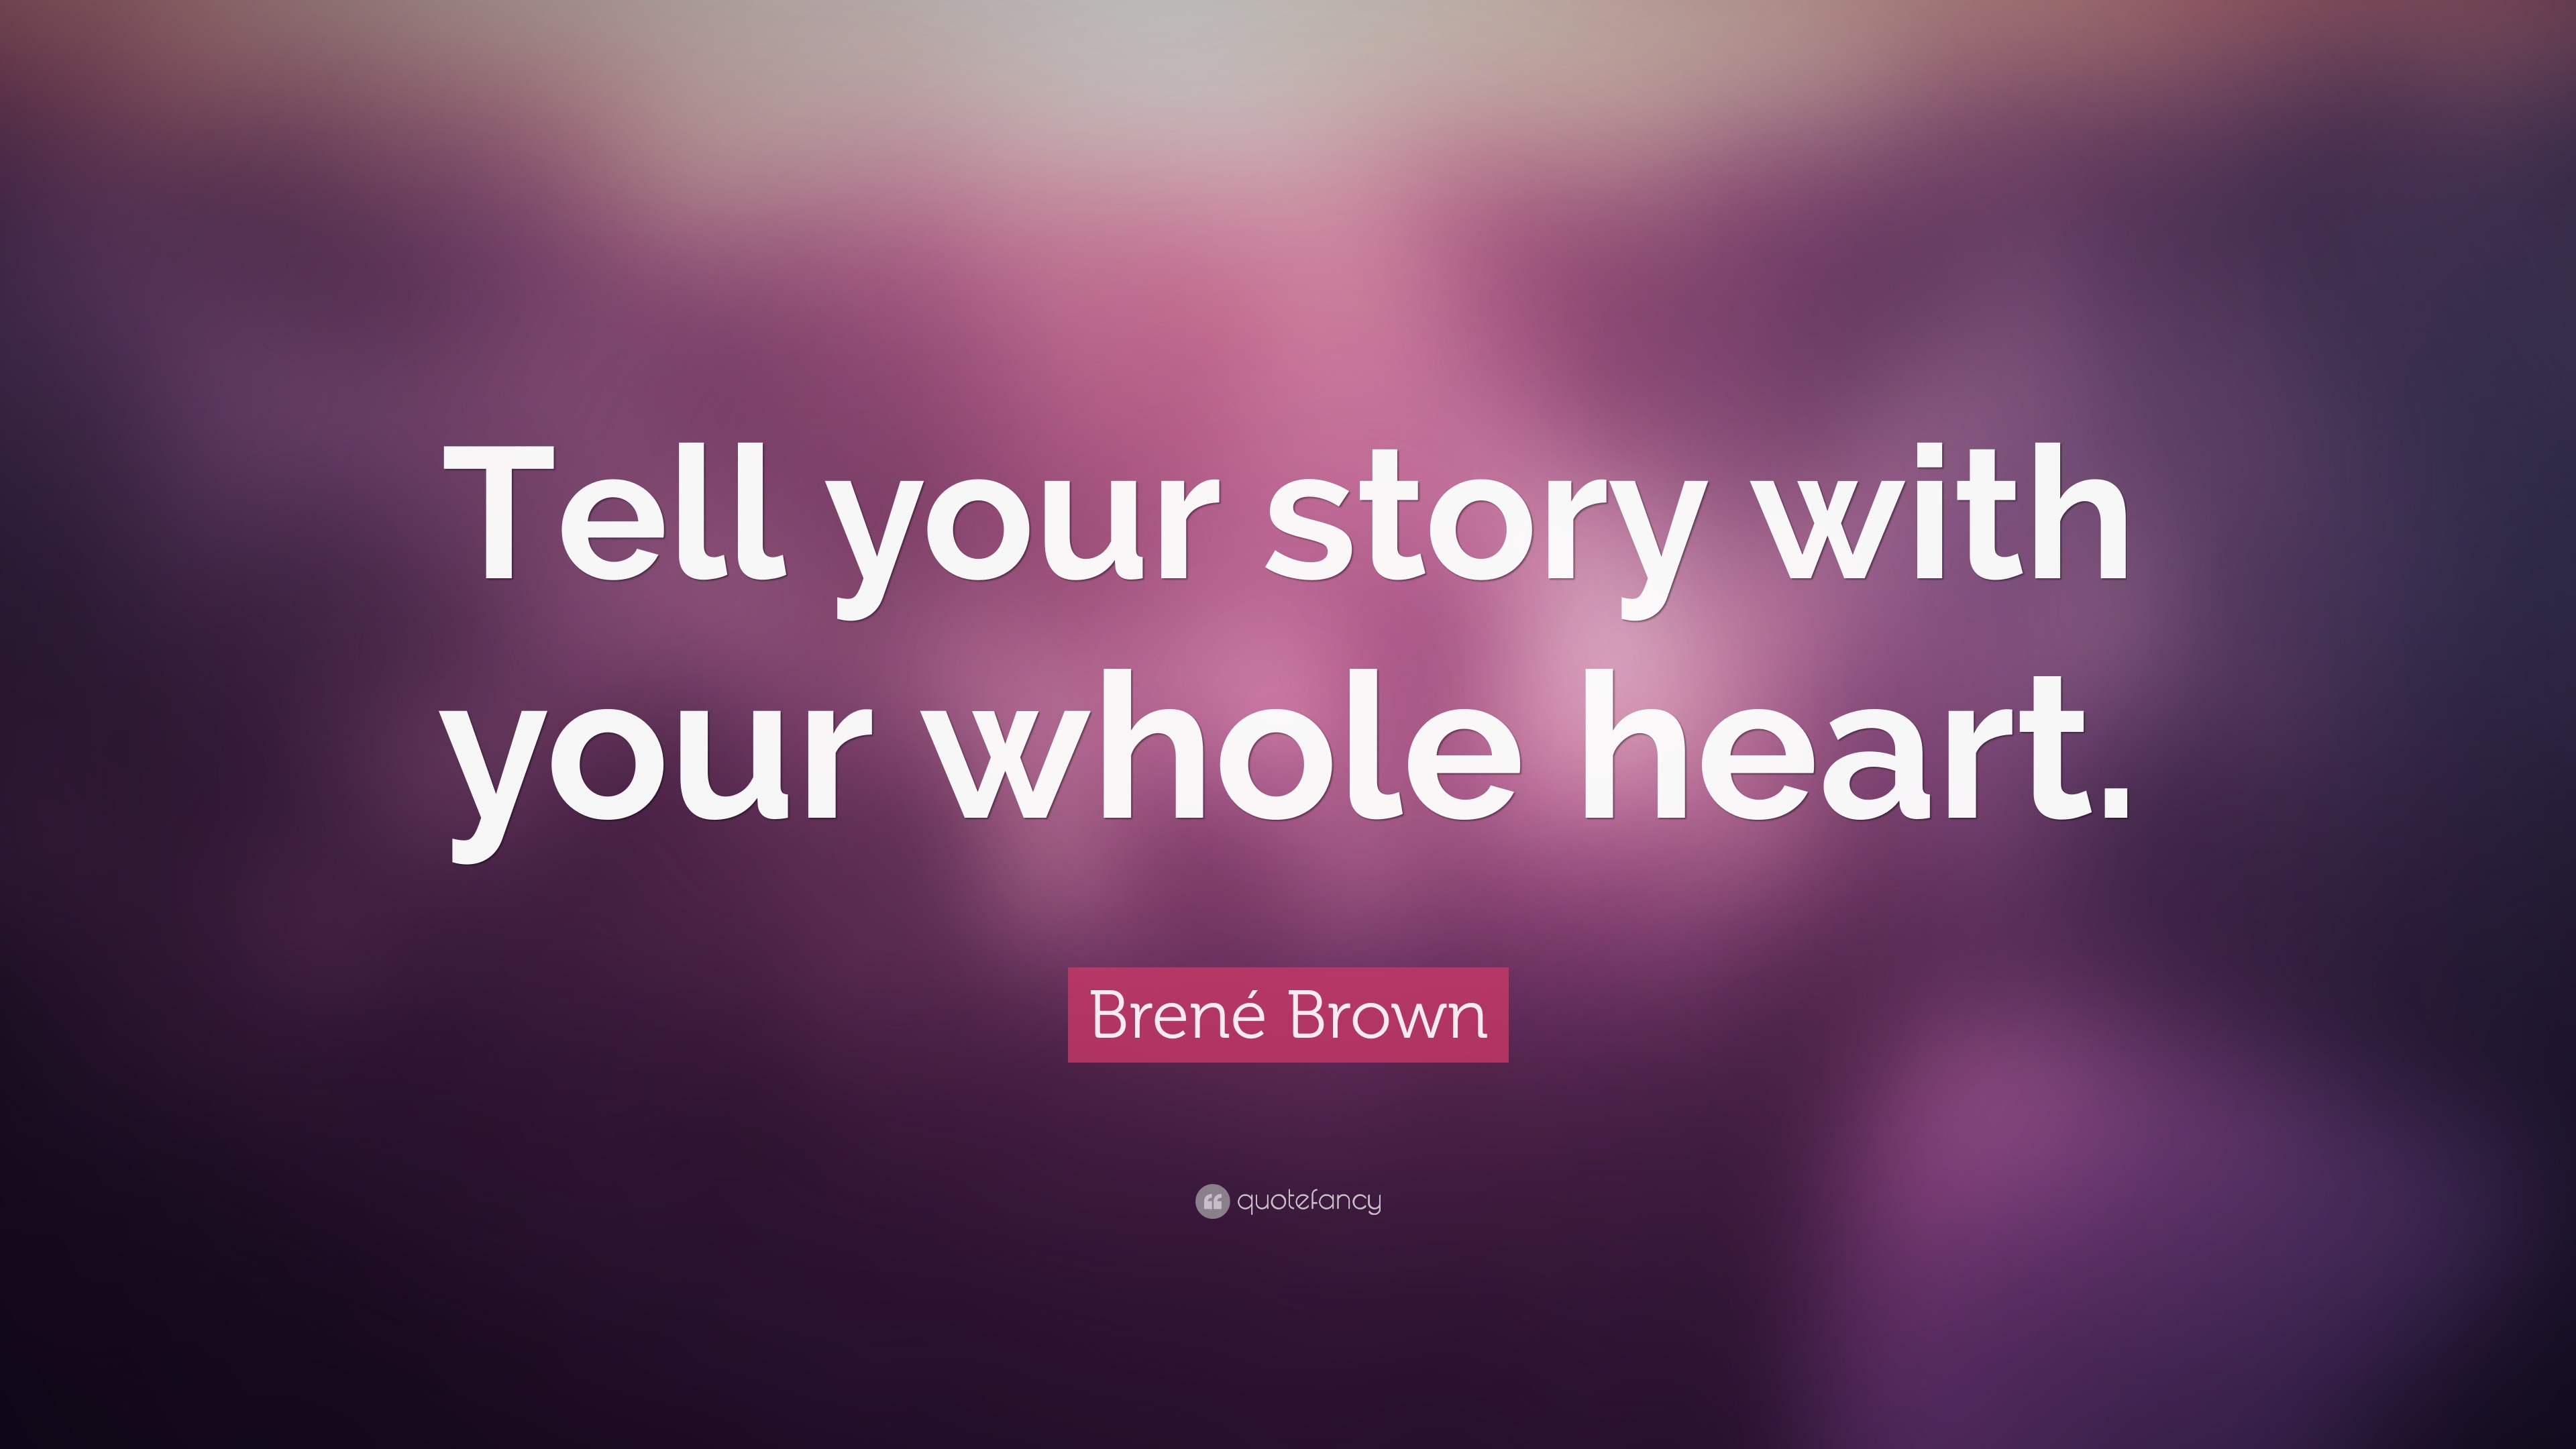 Brené Brown Quote “Tell your story with your whole heart ”